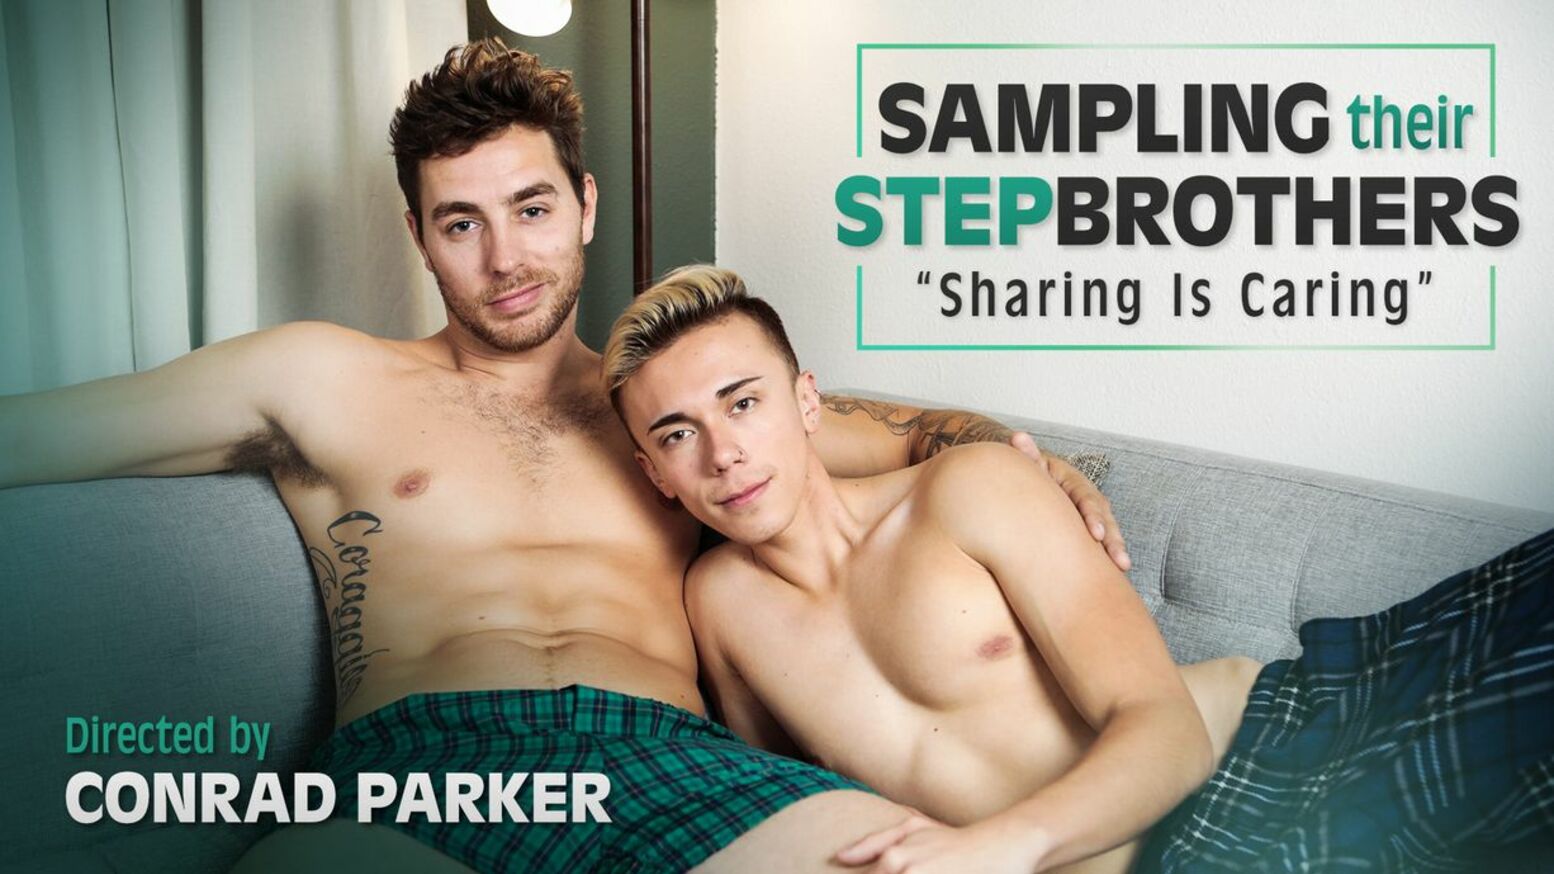 Sampling Their Stepbrothers - Sharing Is Caring